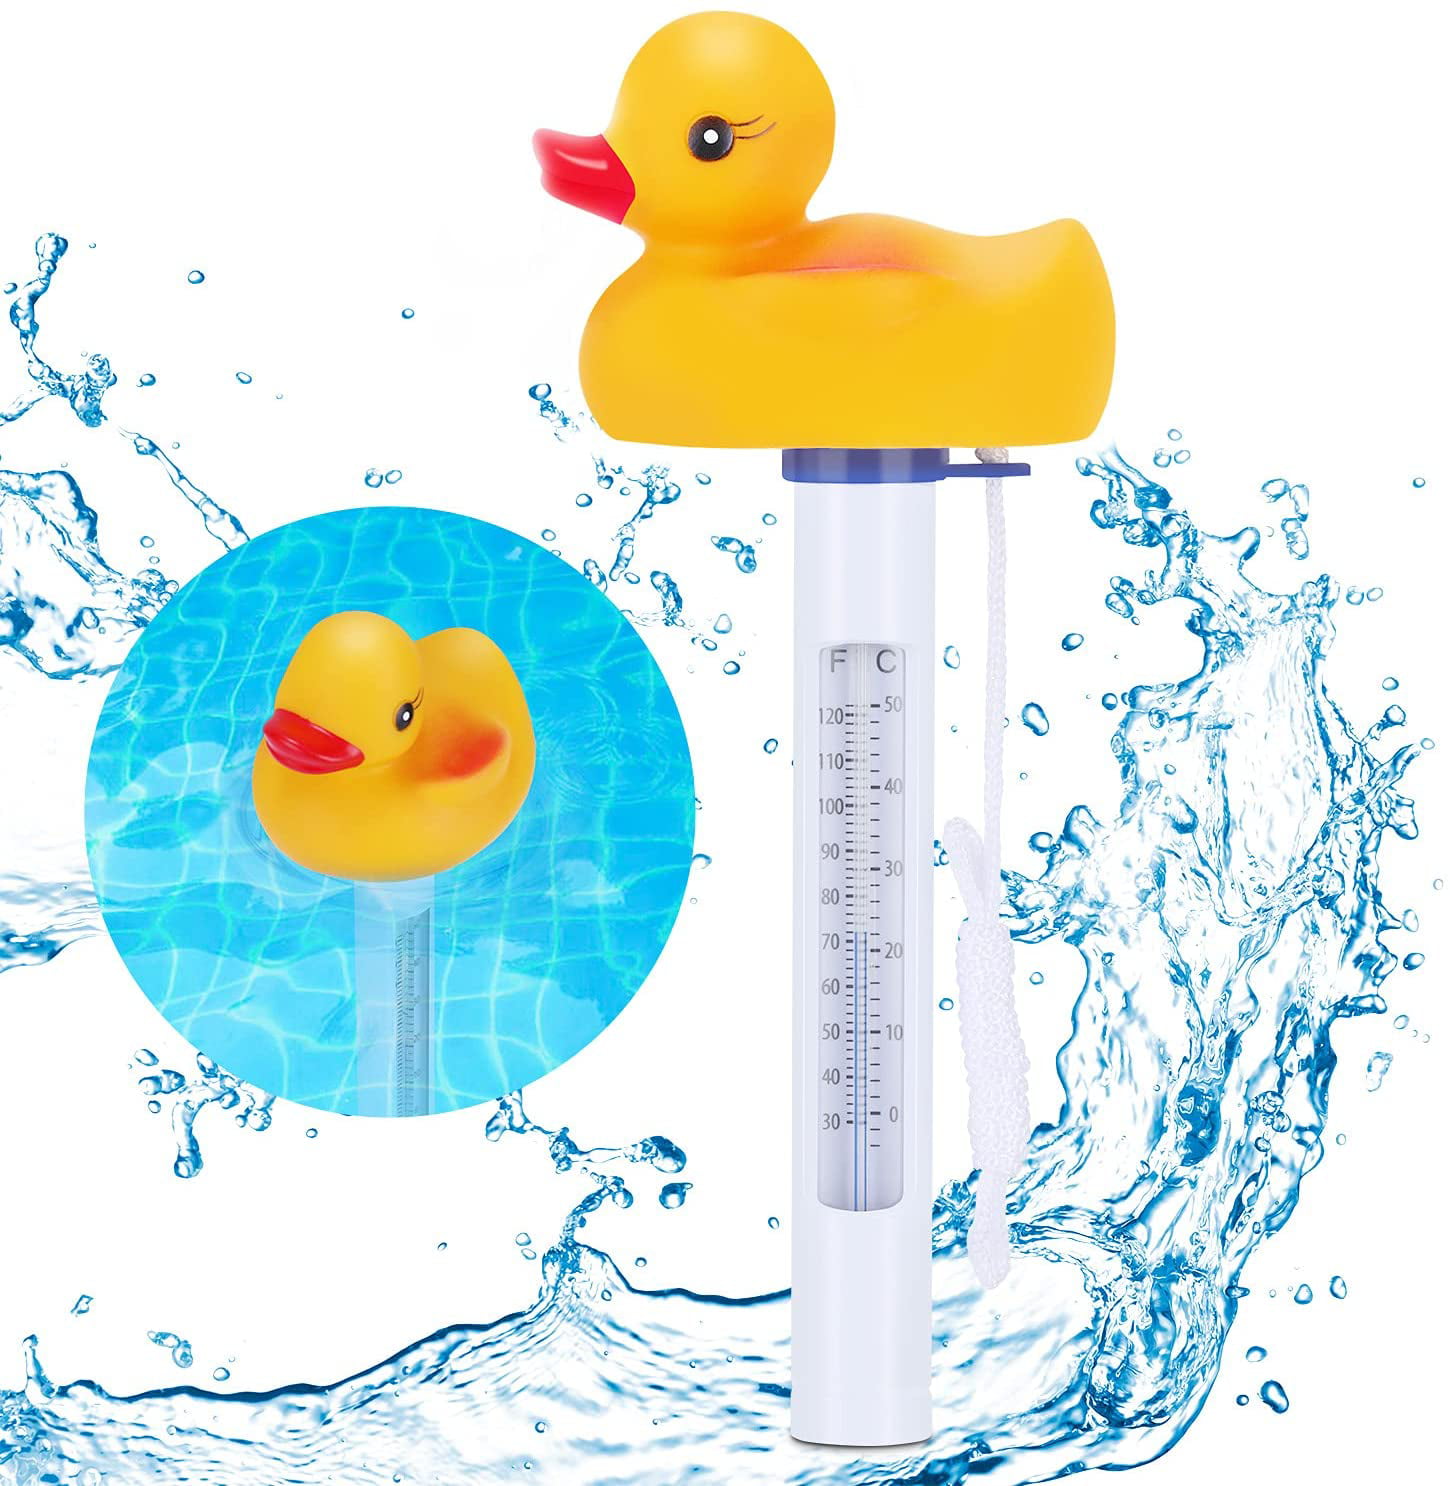 Accurate & Durable Spa & Pool Floating Thermometer w/ Adorable Rubber Ducky 